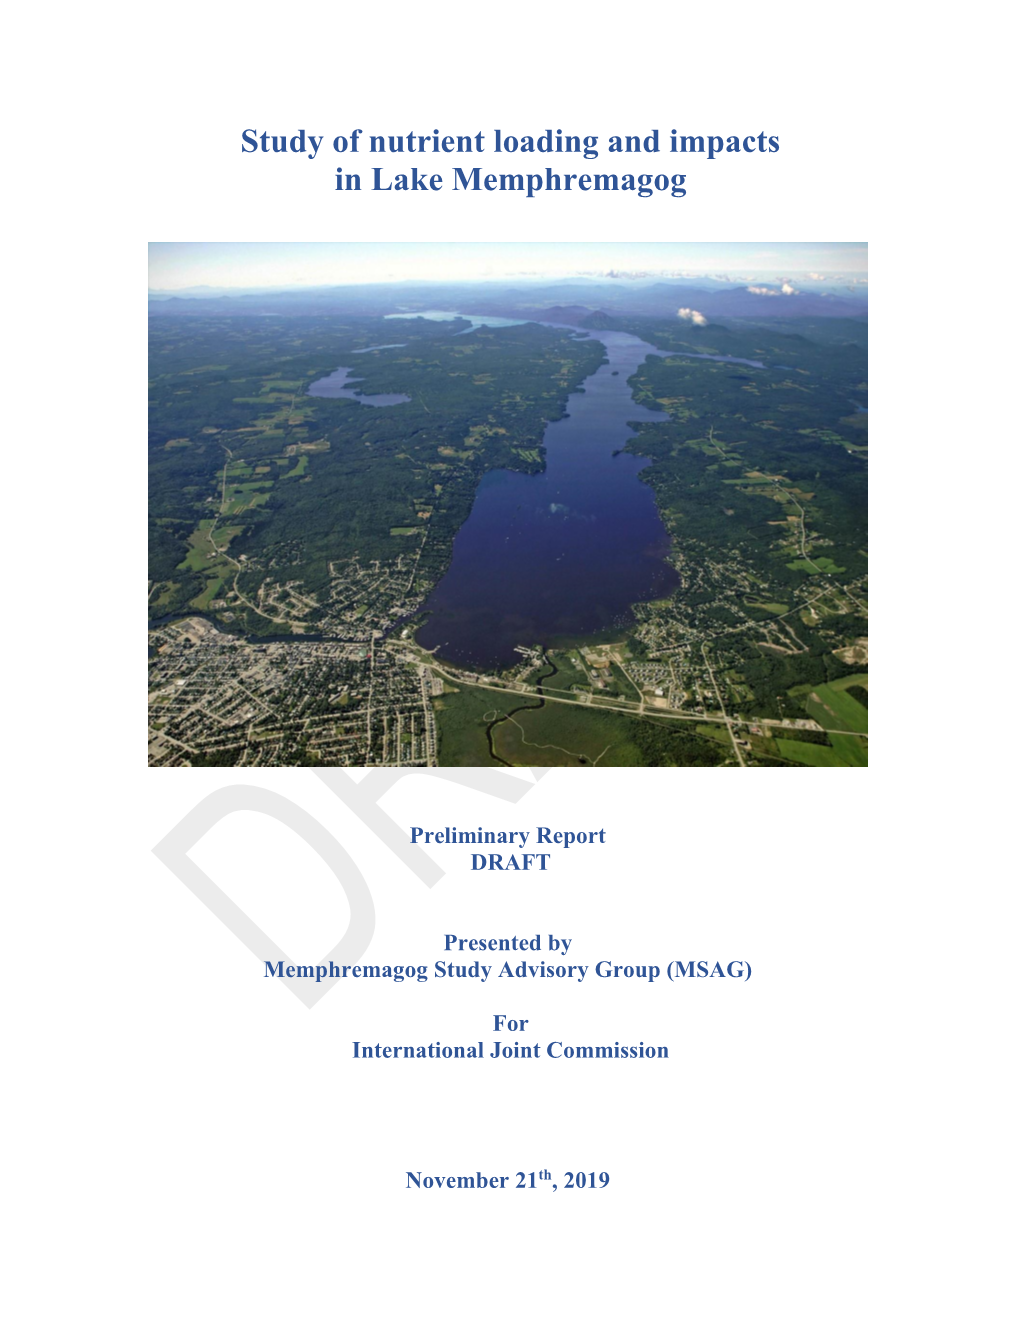 Study on Nutrient Loading and Impacts on Lake Memphremagog for Public